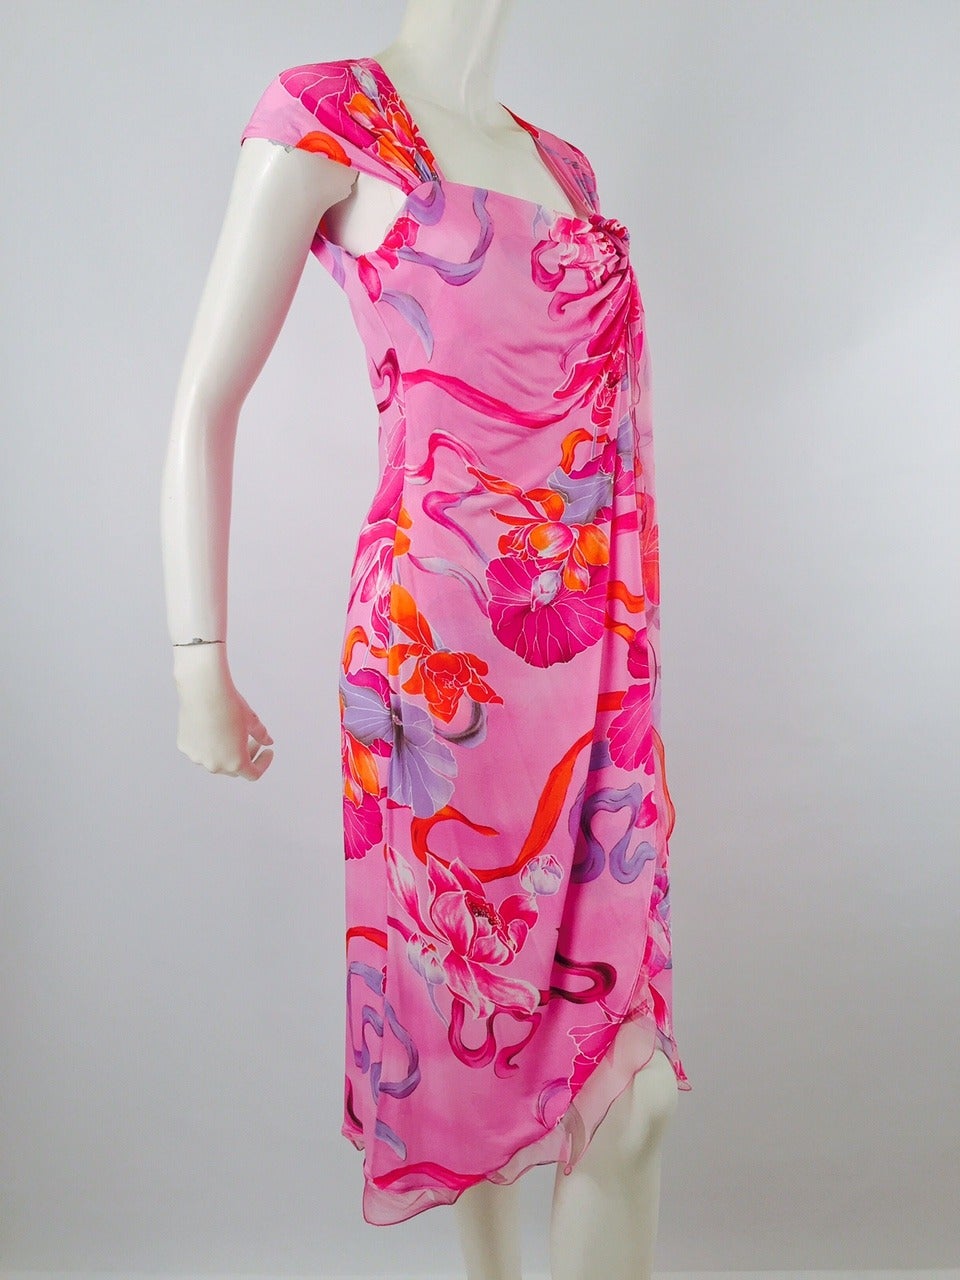 Pink Floral Bias Cut Wrap Dress is typical of Emanuel Ungaro designs...decidedly French...decidedly Flirty!  Features cap sleeves, asymmetric ruffled hem with lettuce edging, and exotic floral print.  Dress is gathered and knotted on top left.  Knot